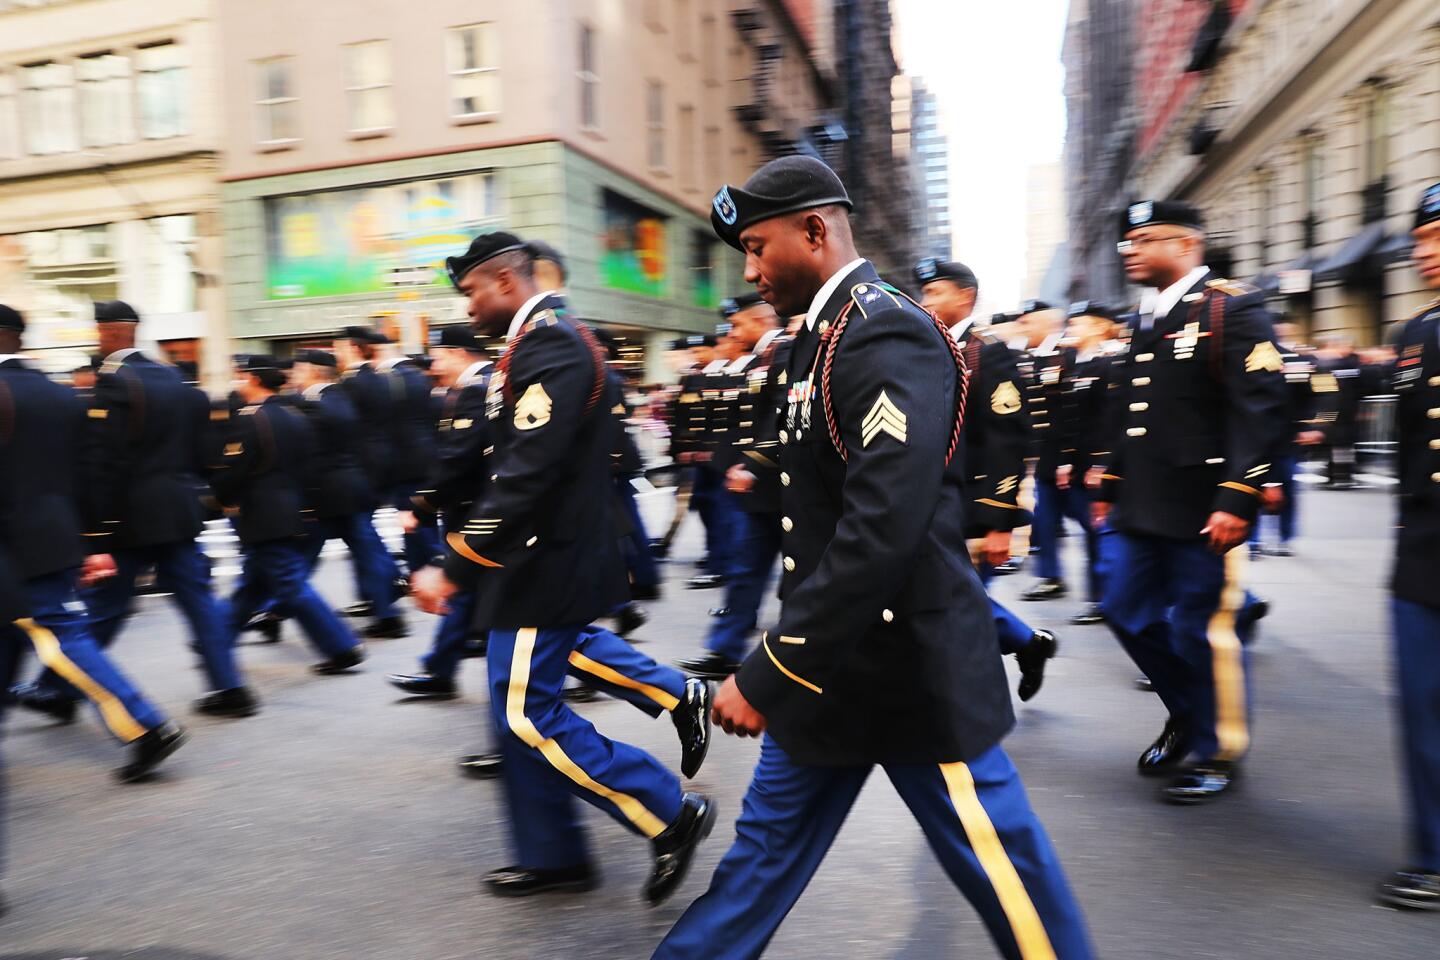 Members of the Army march in the nation's largest Veterans Day parade in New York City. Known as America's Parade, it features more than 20,000 participants, including veterans, military units, businesses, high school bands and civic and youth groups.